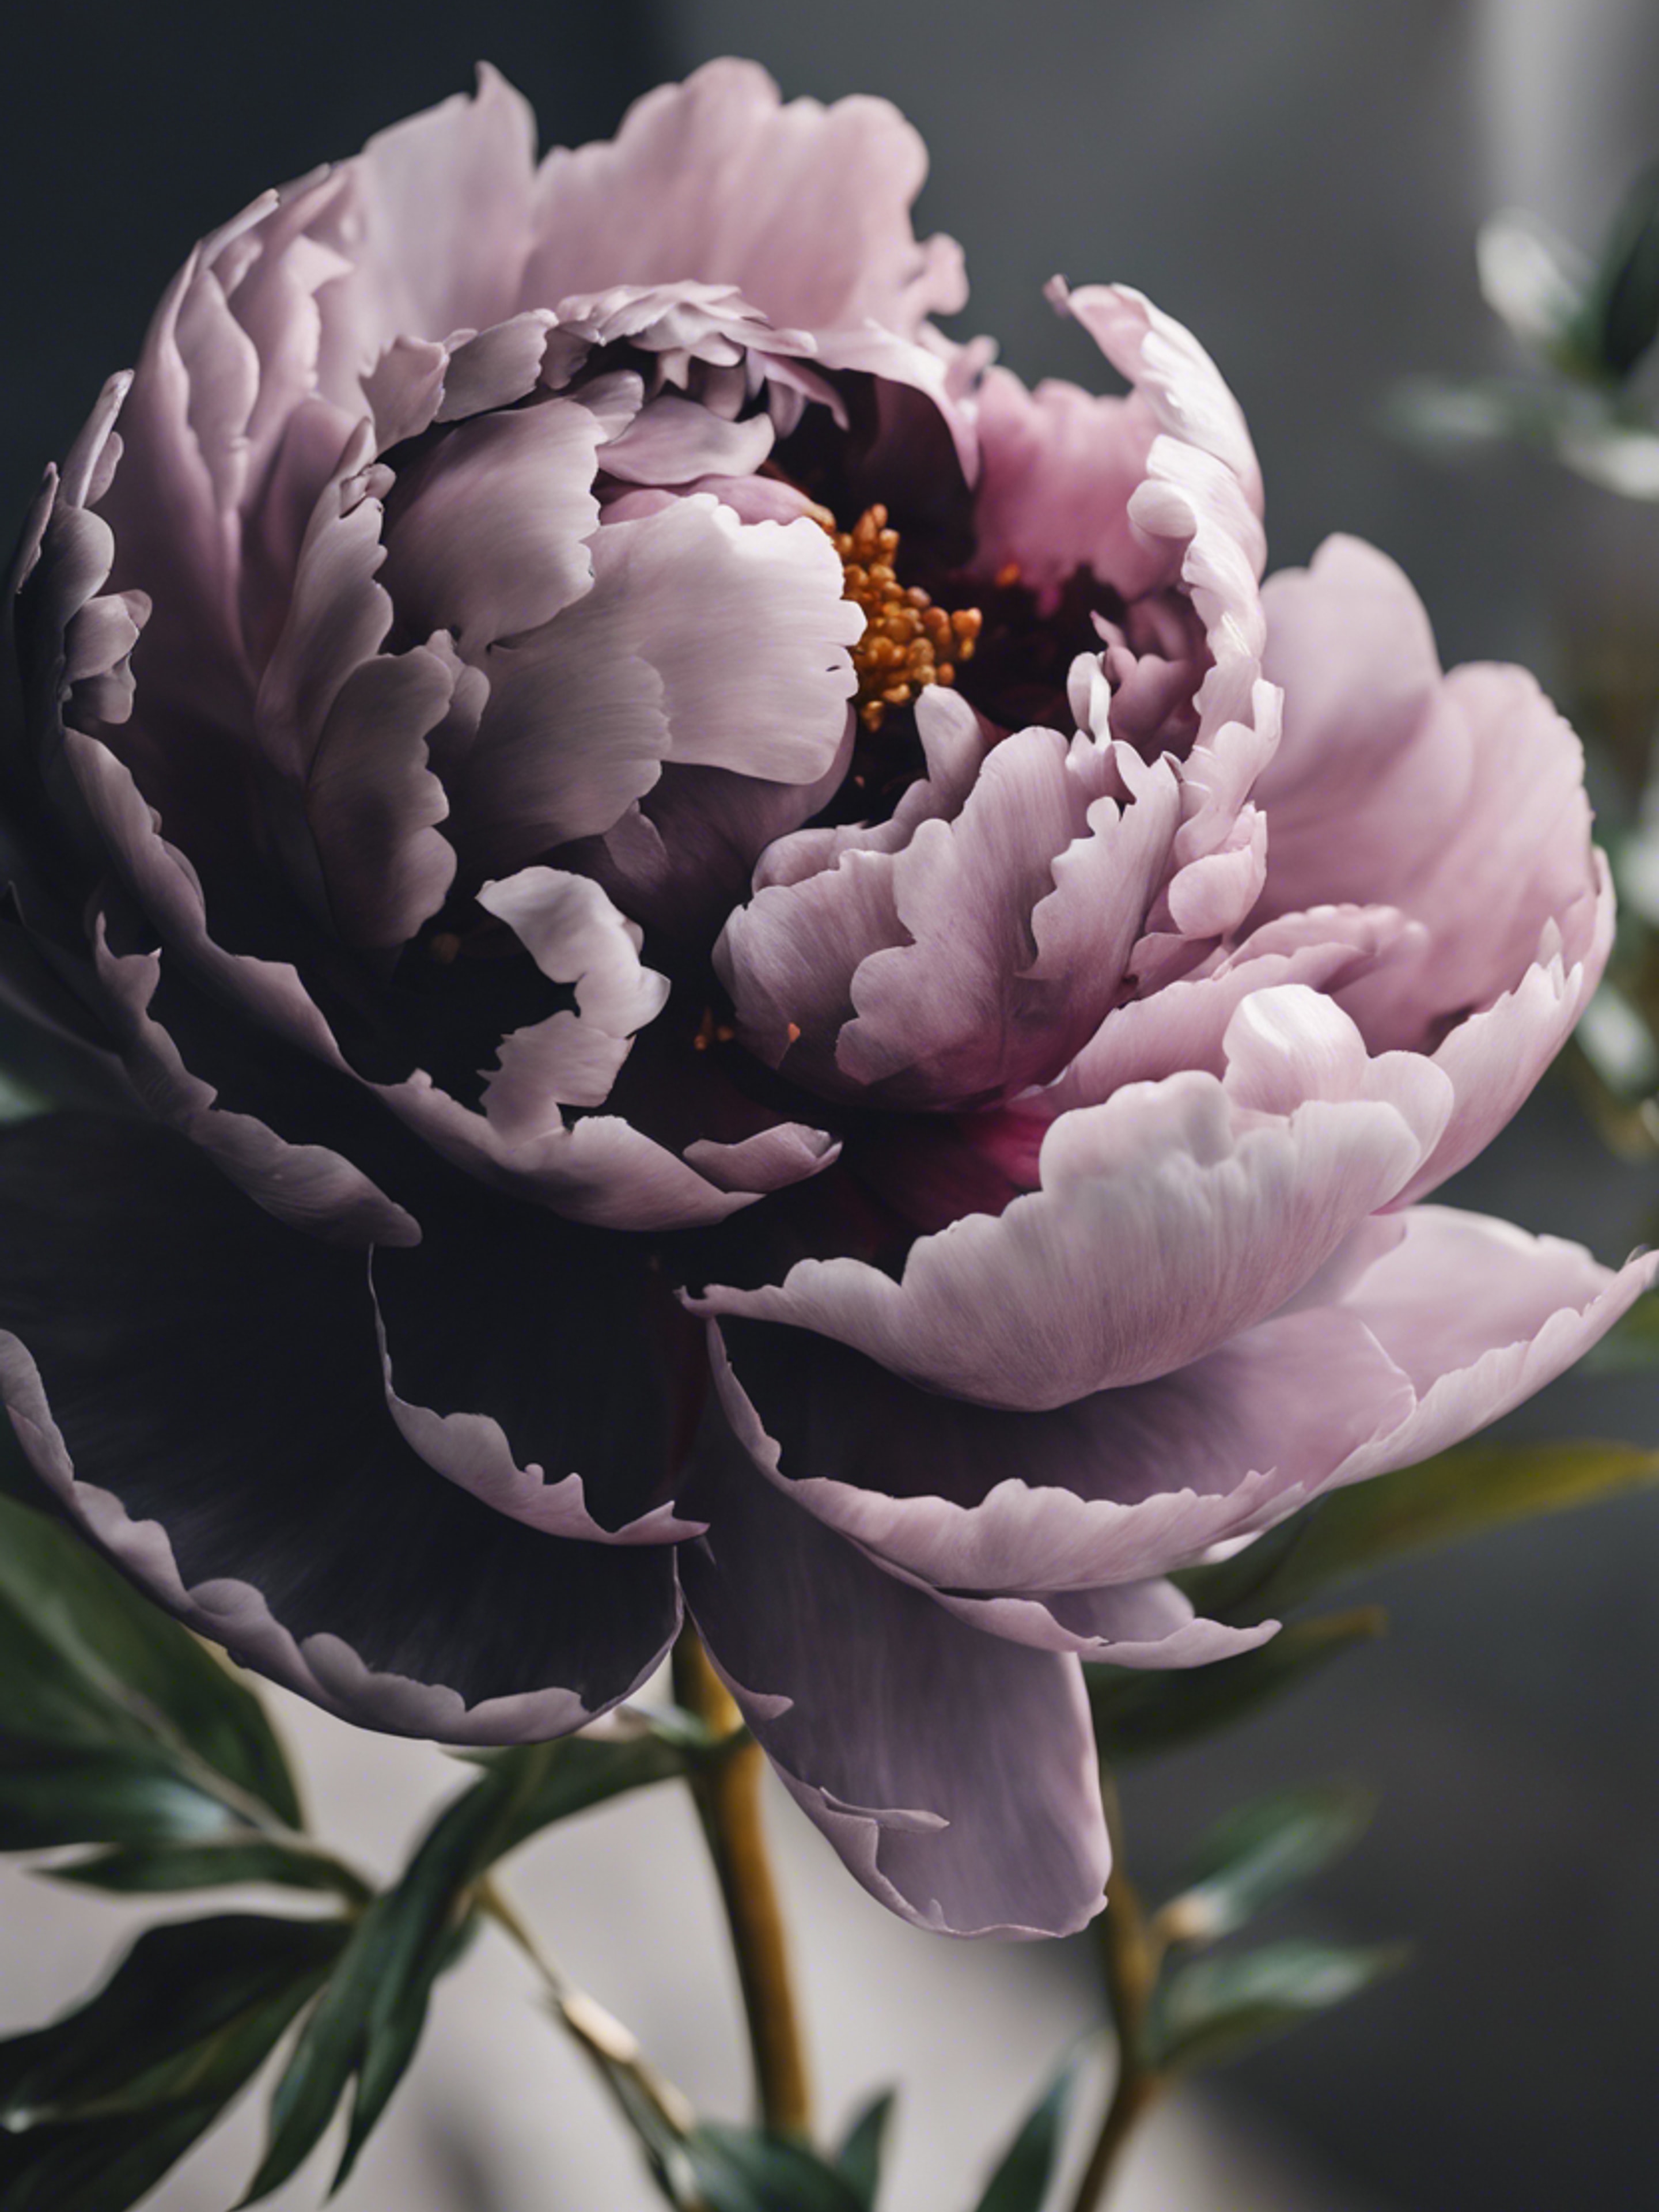 A black peony, the symbol of prosperity and honor, complementing a traditional Asian painting. Wallpaper[2c78f74174874eadaf7e]